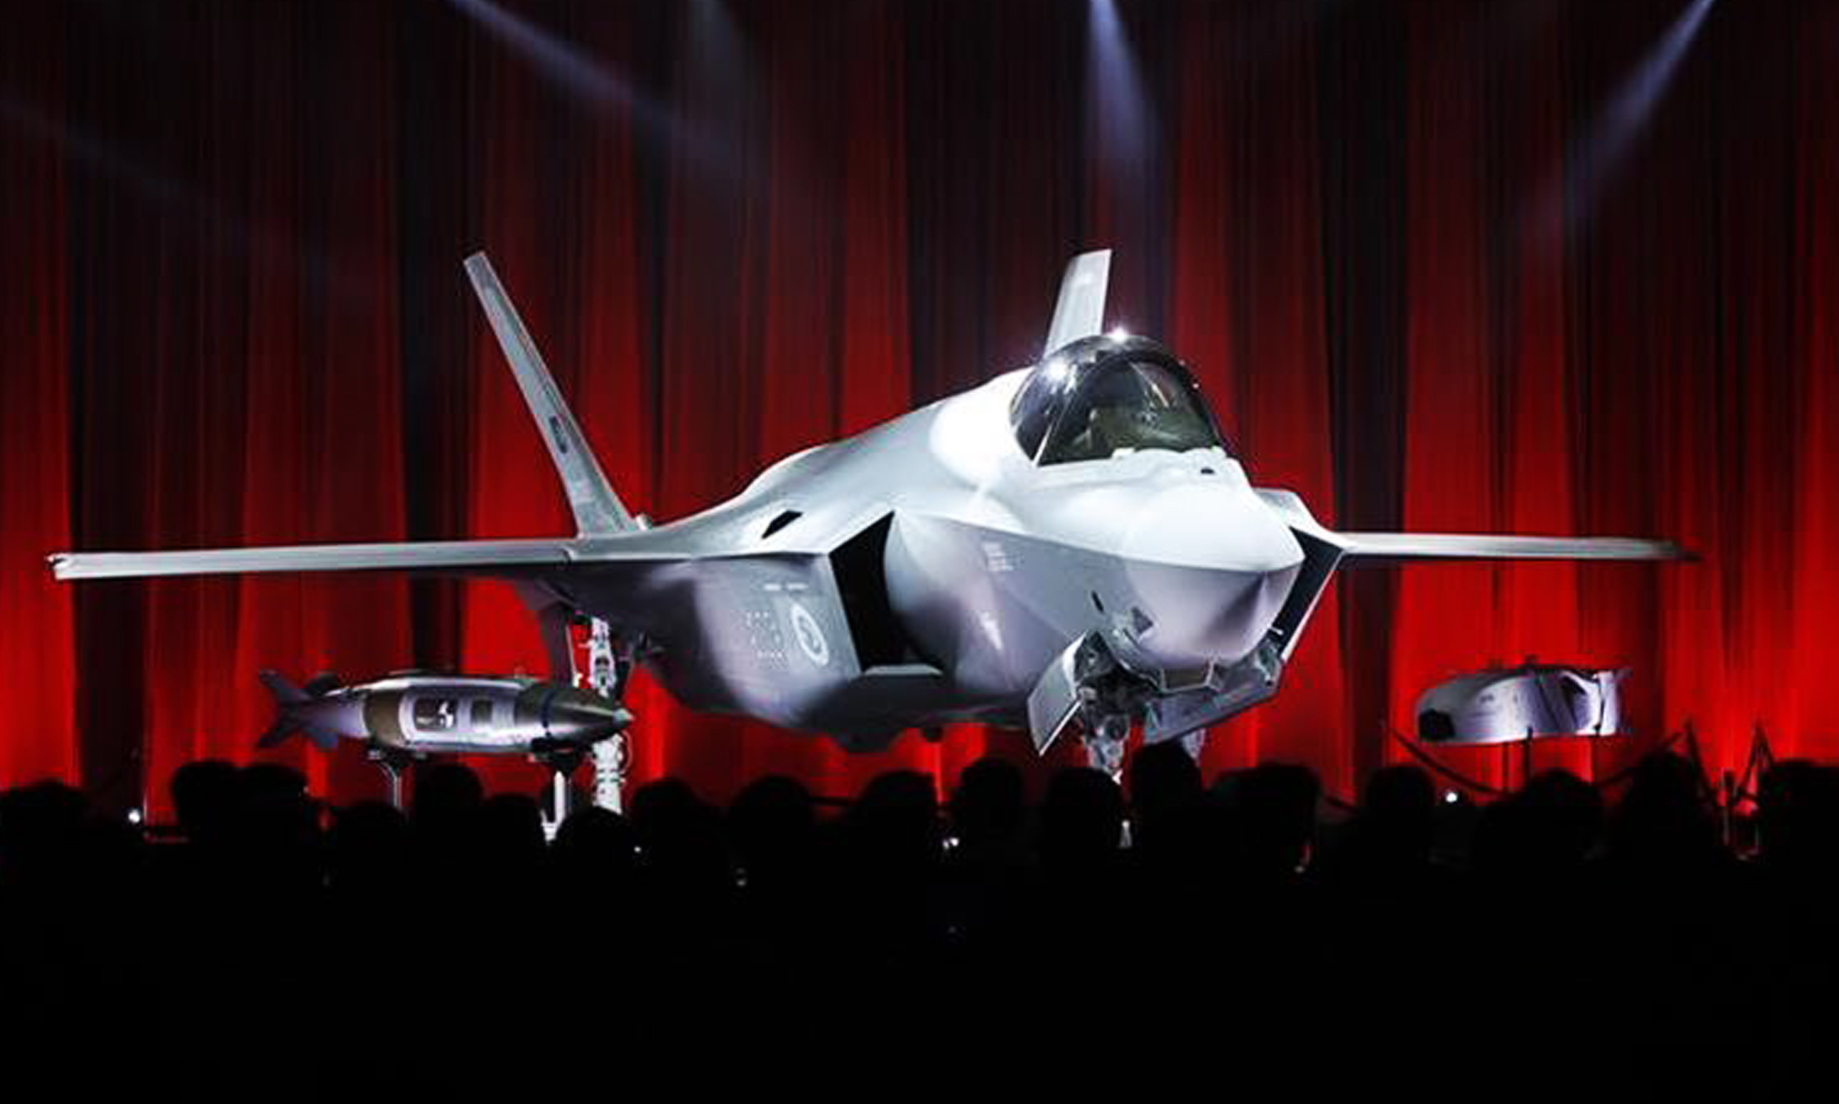 U.S. Bars Turkey From F-35 Programme Over Russian Missile Purchase